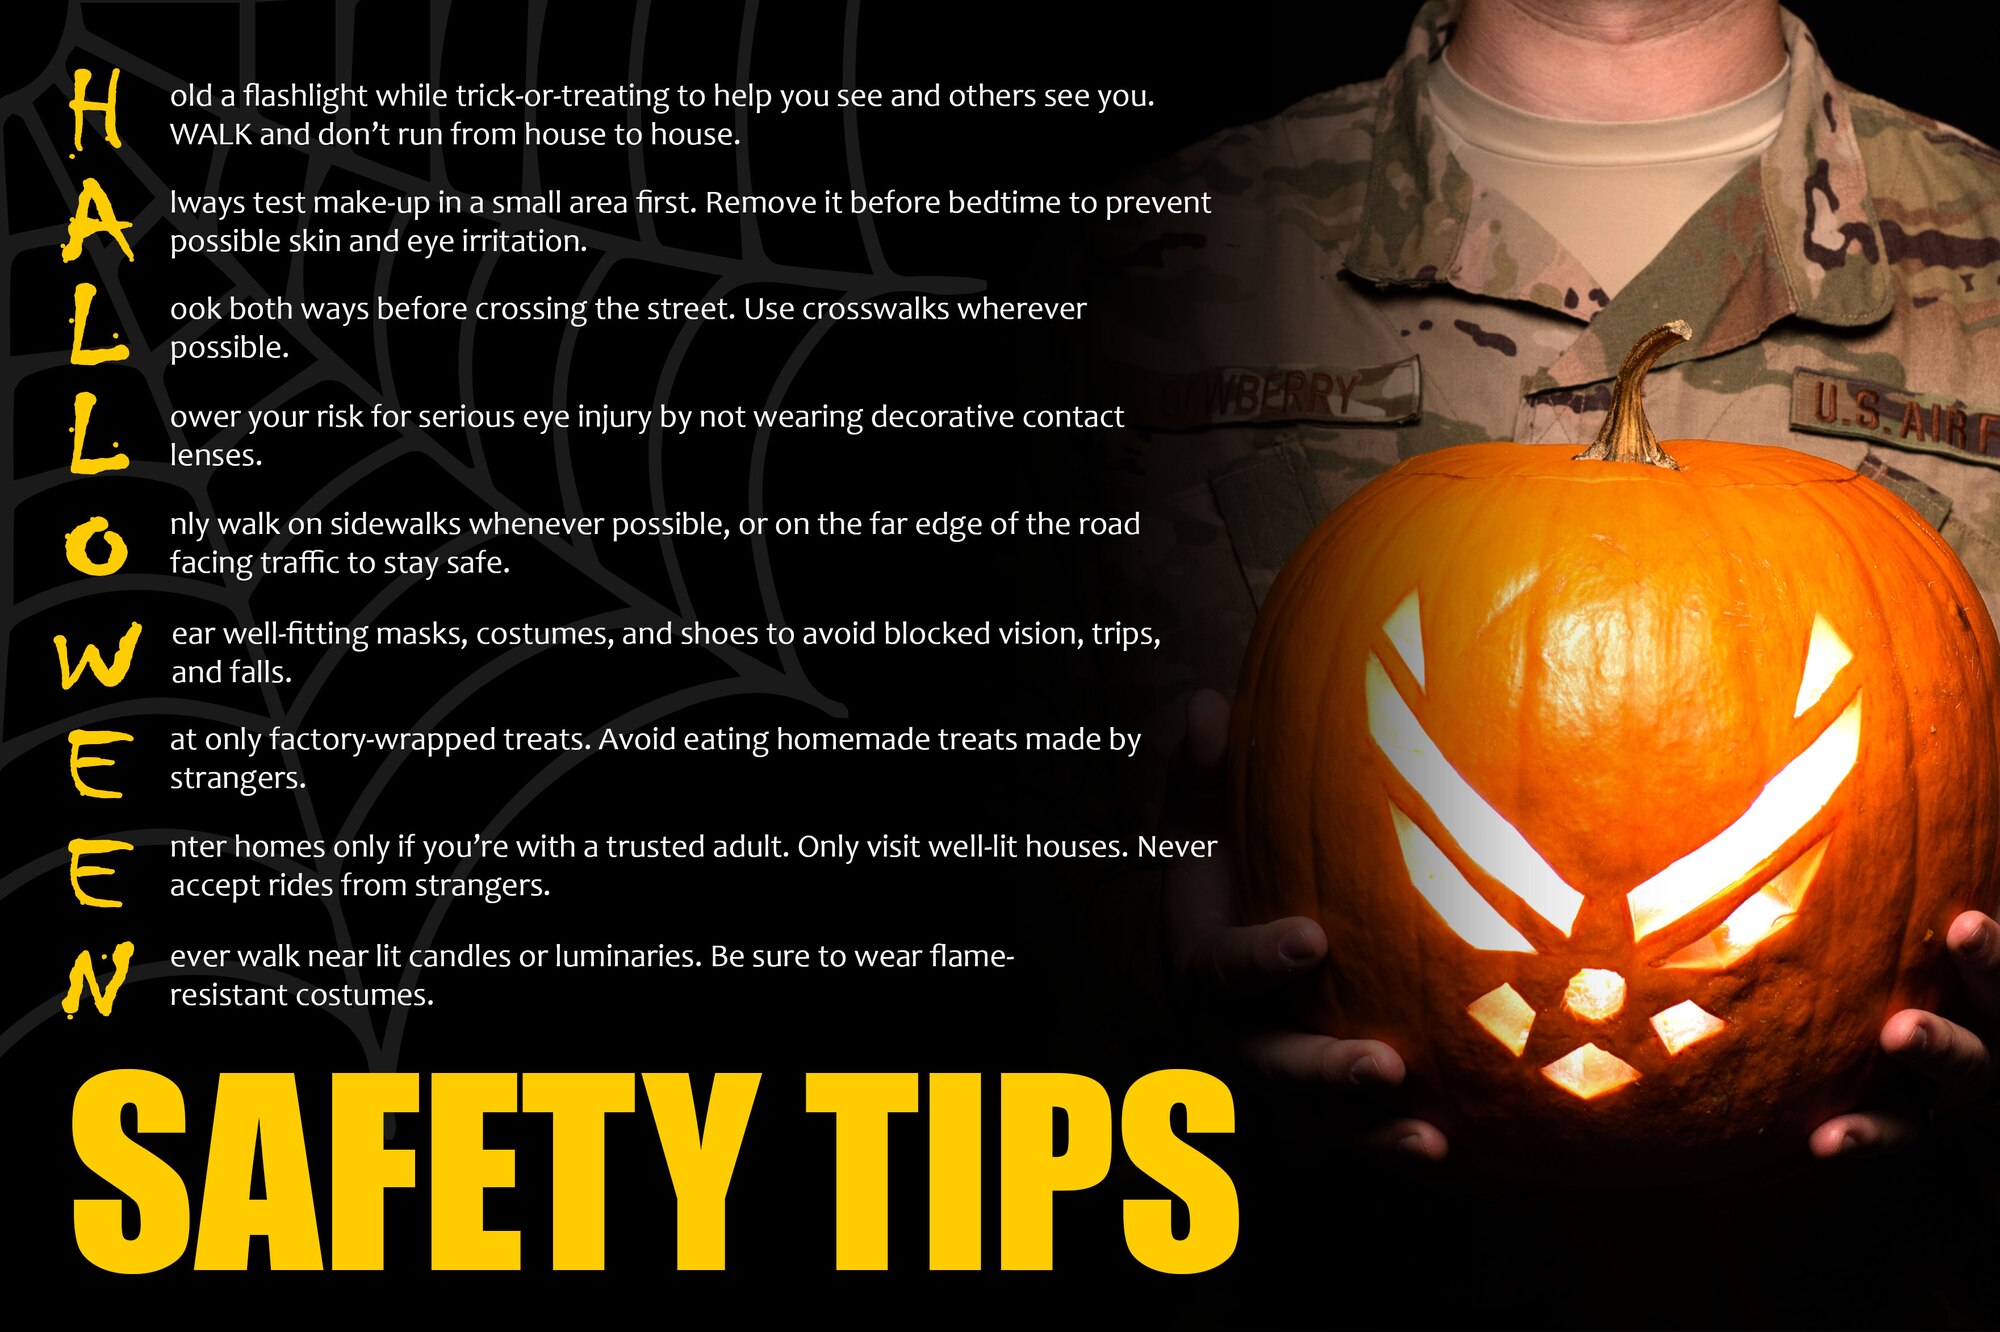 Remember to take safety in mind as you prepare for the Halloween festivities